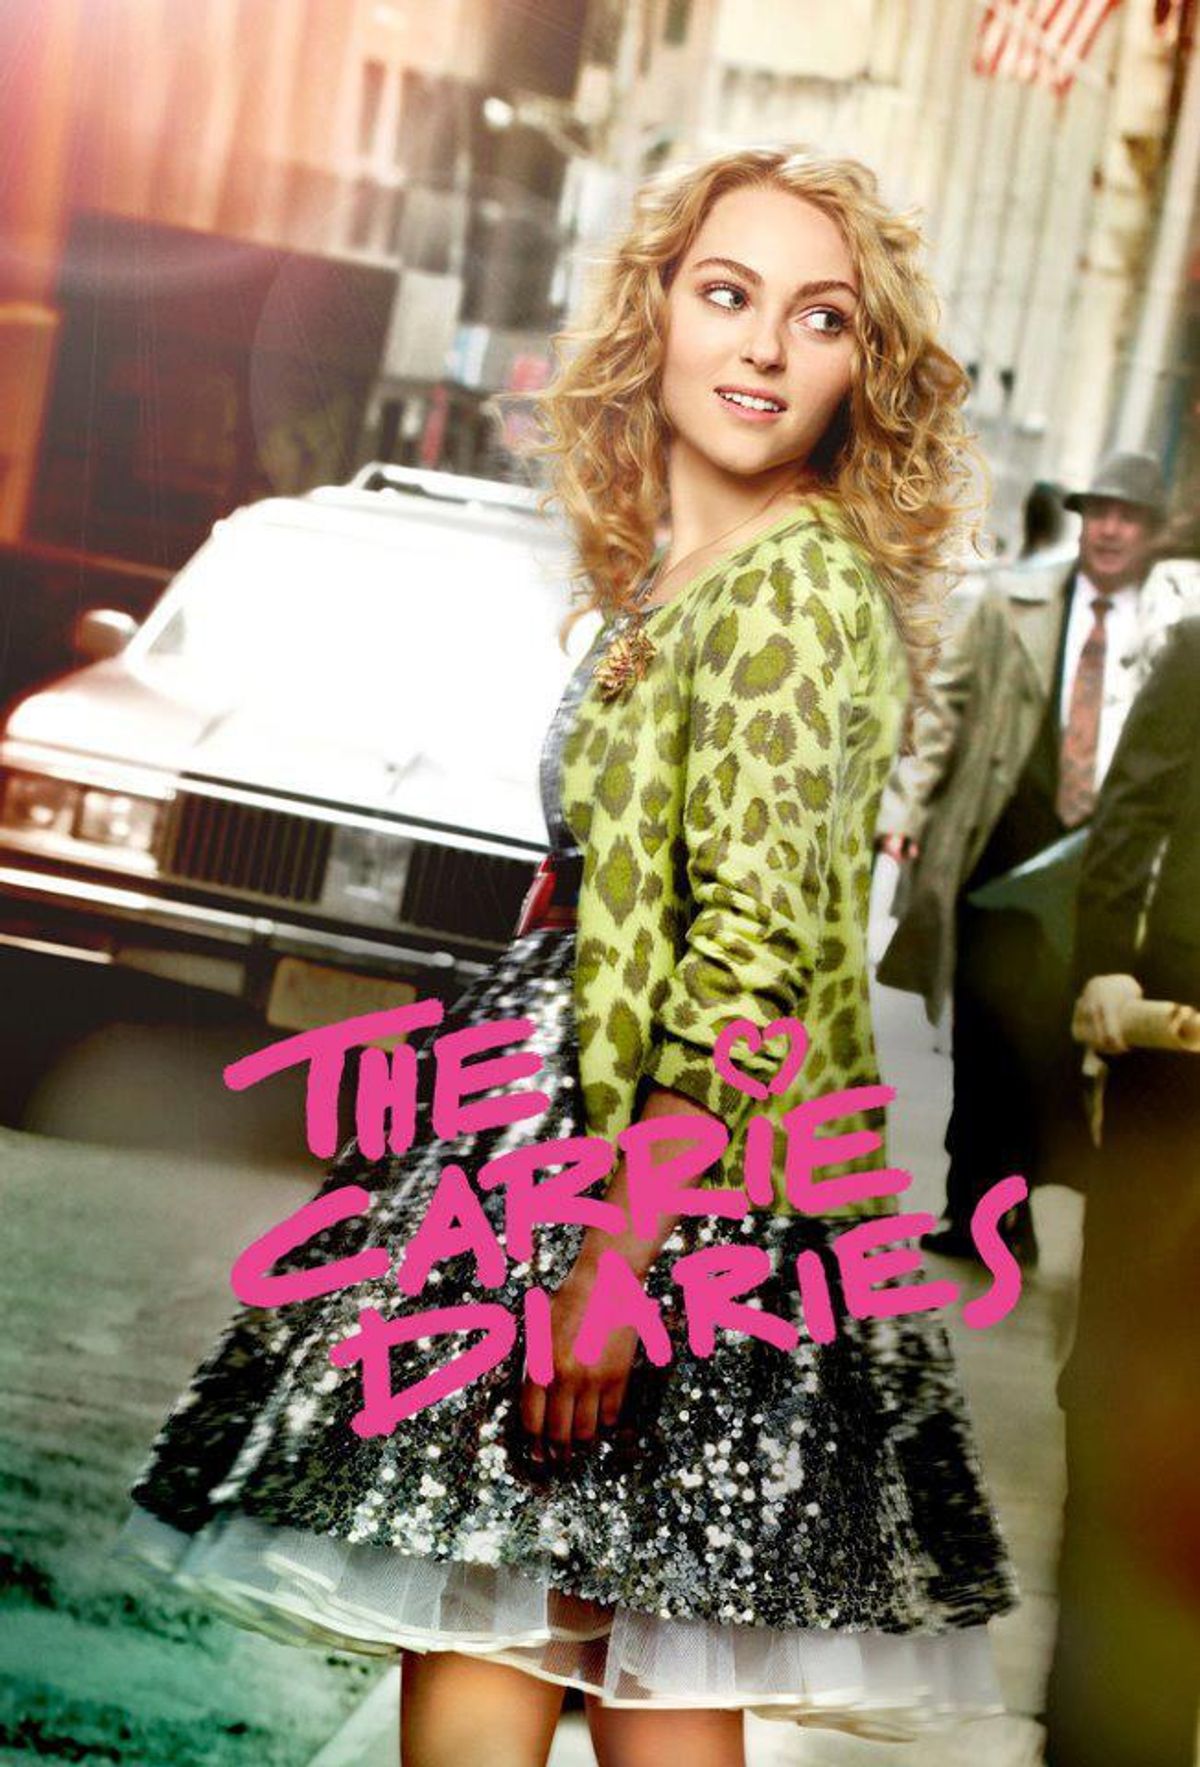 10 Reasons Why 'The Carrie Diaries' Shouldn't Have Been Cancelled